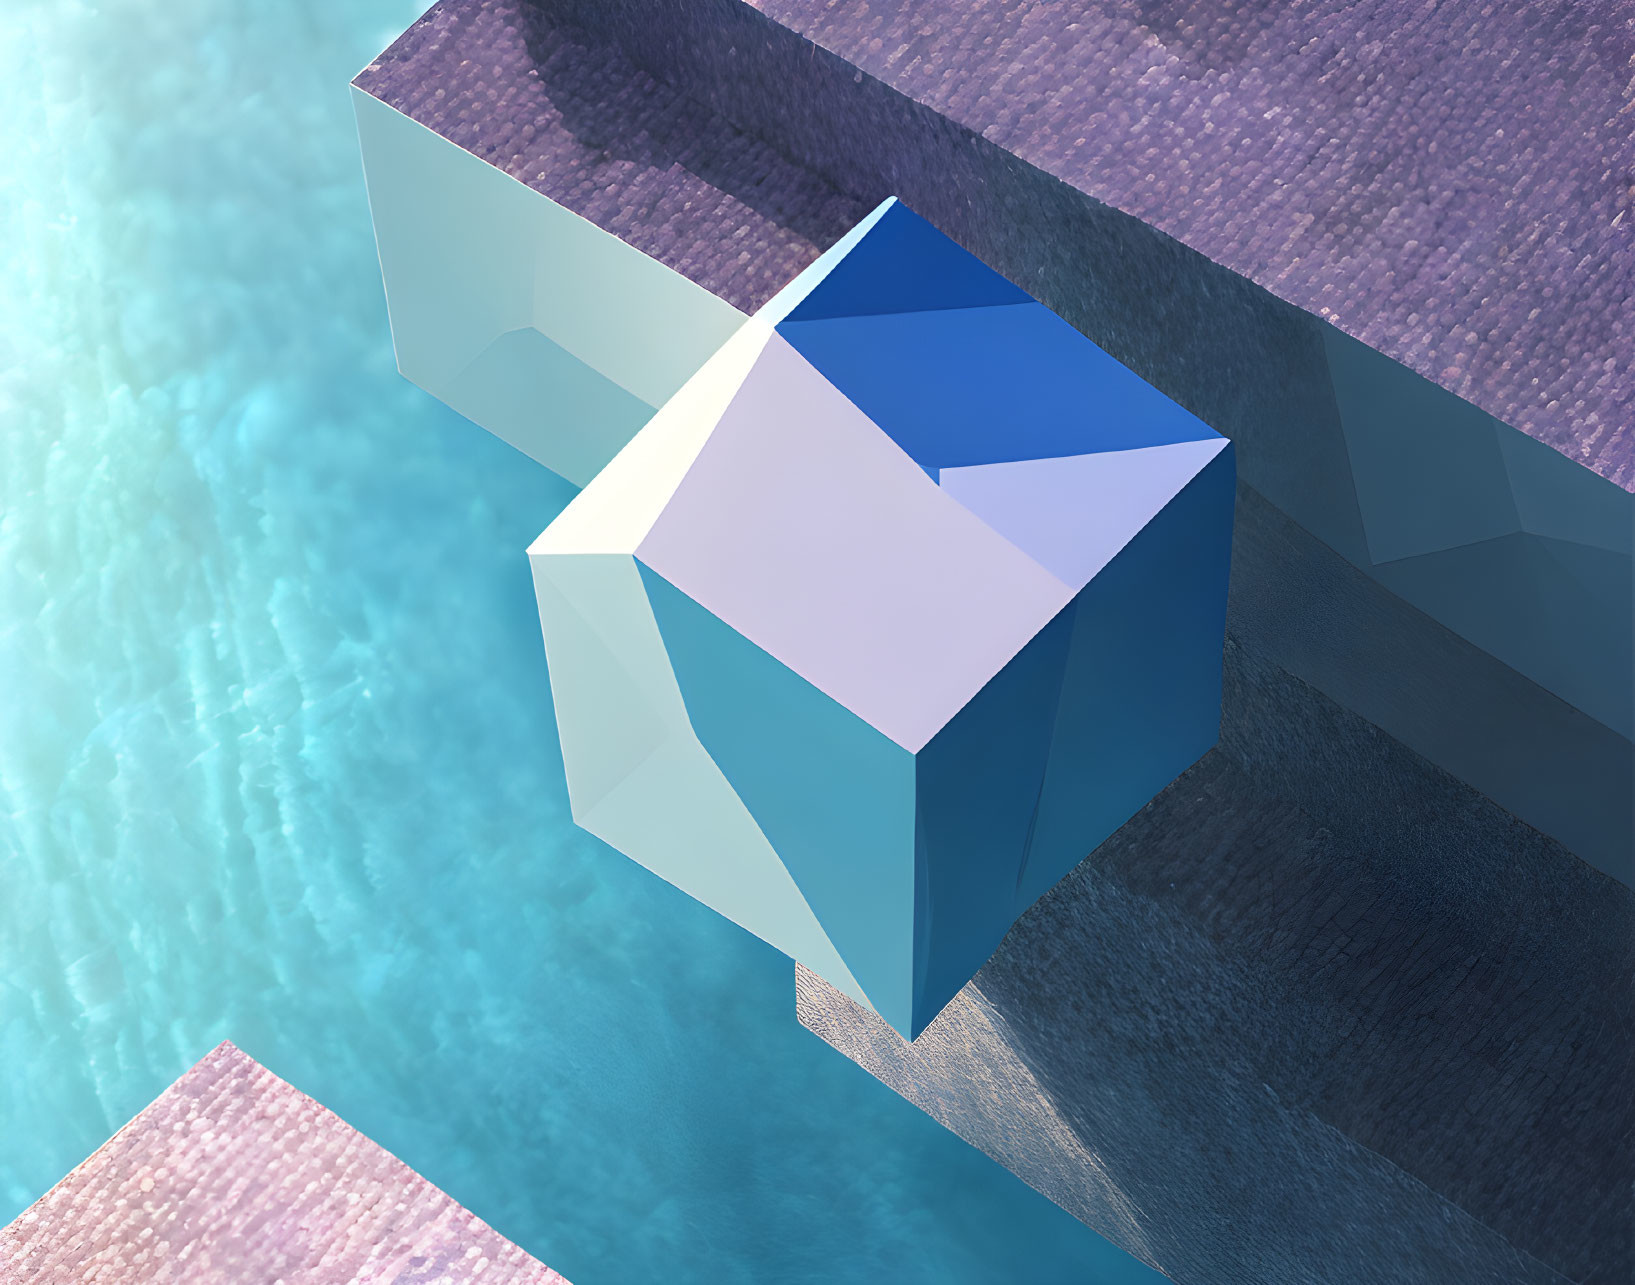 Transparent Blue Cube Emerging from Sea Intersecting Concrete Pier